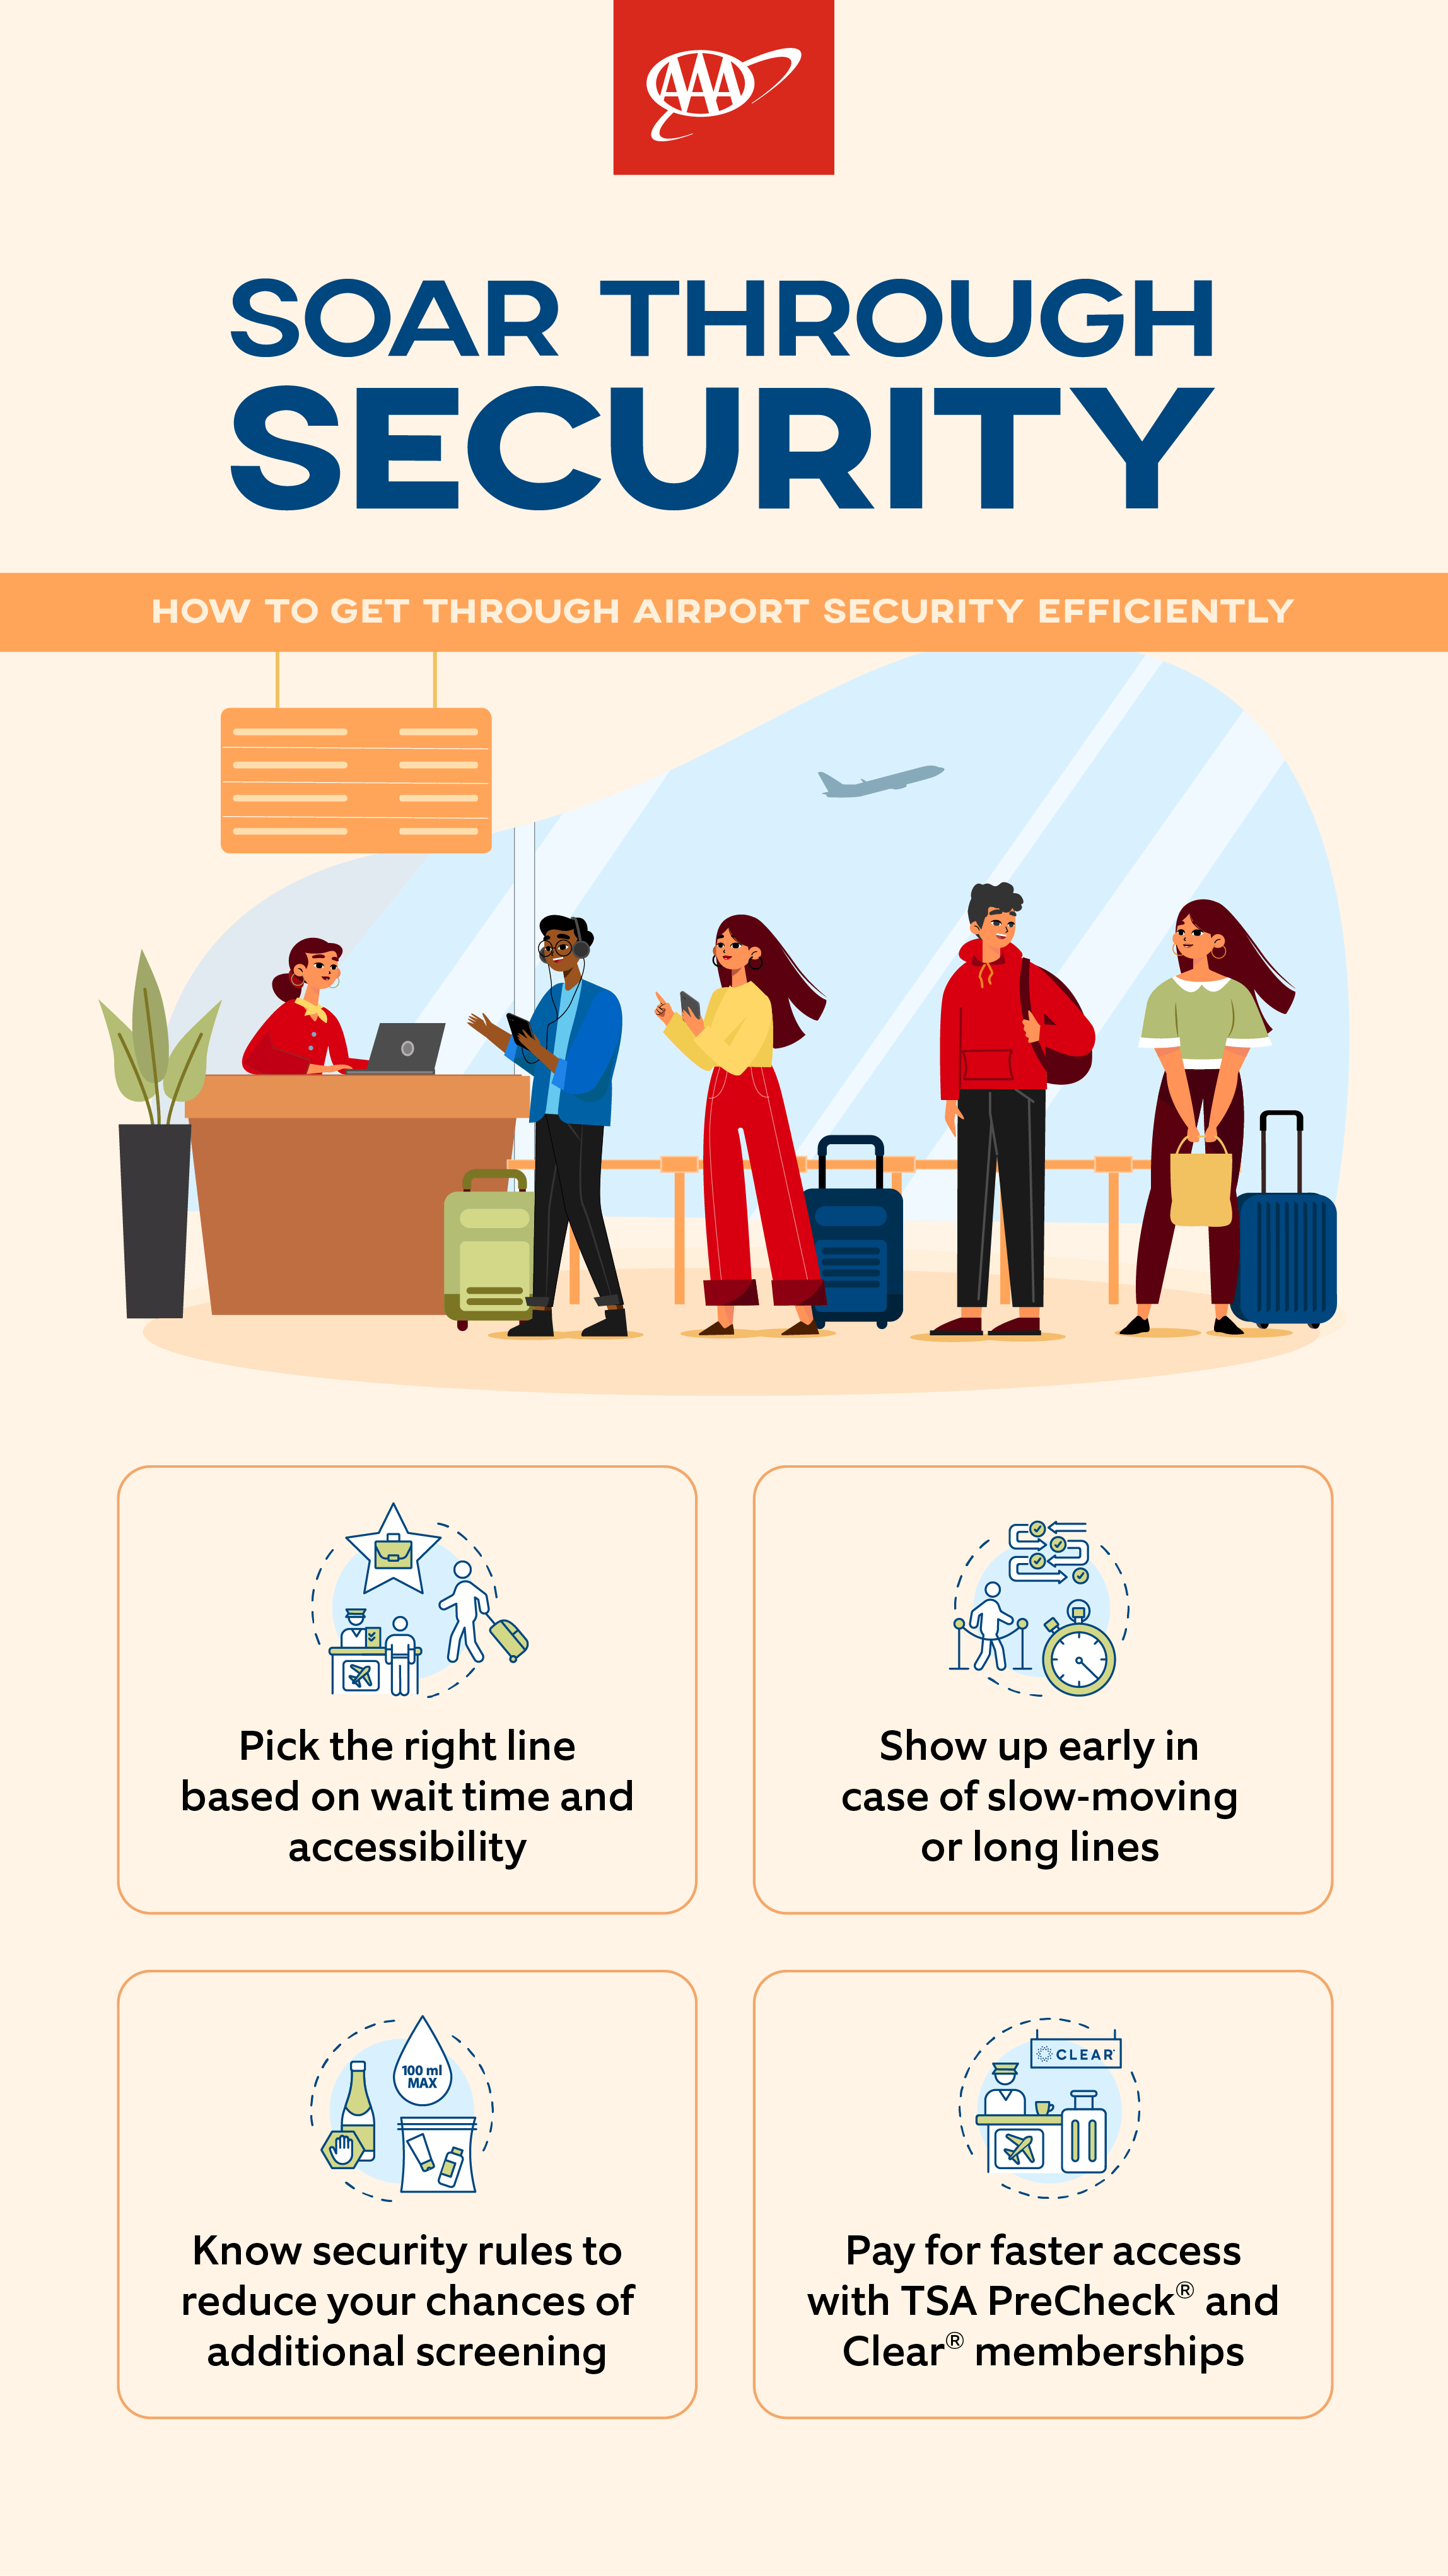 AAA airport security infographic